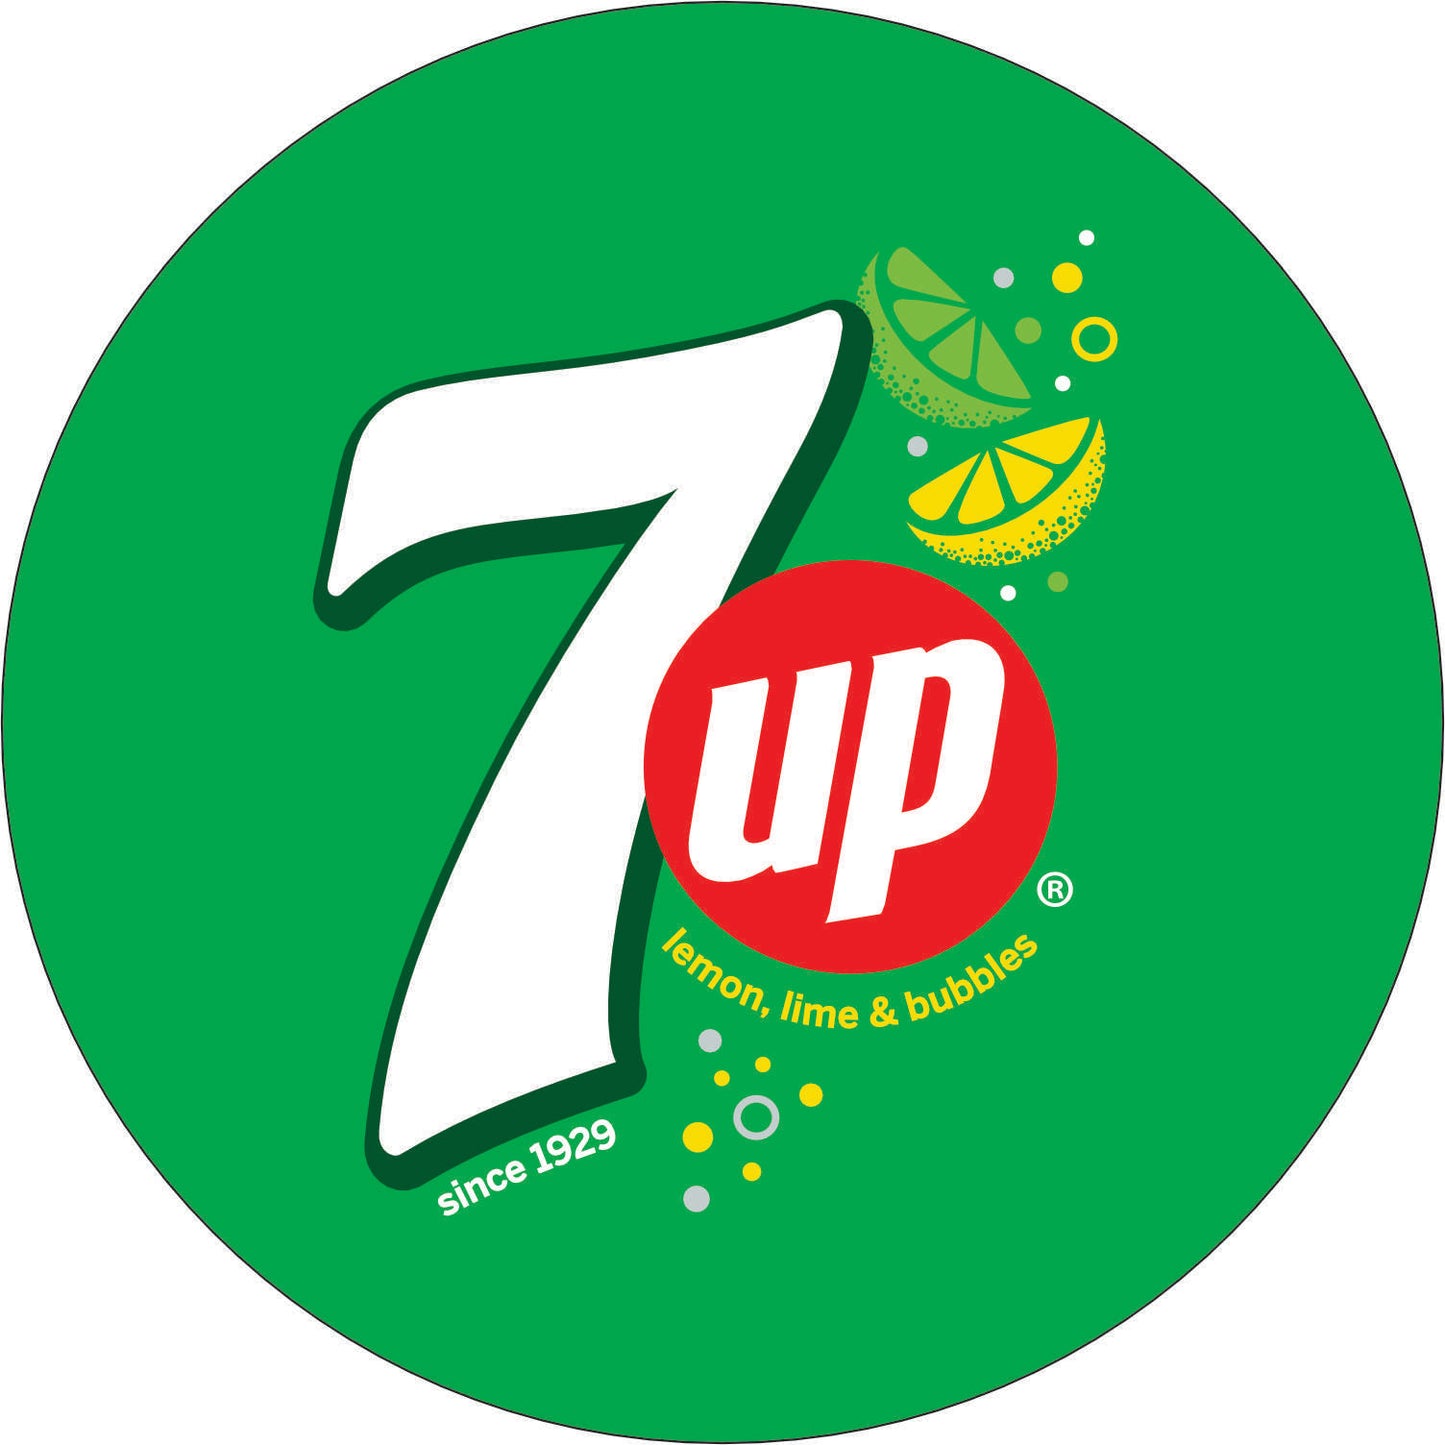 122-Wall clock with neon - 7Up